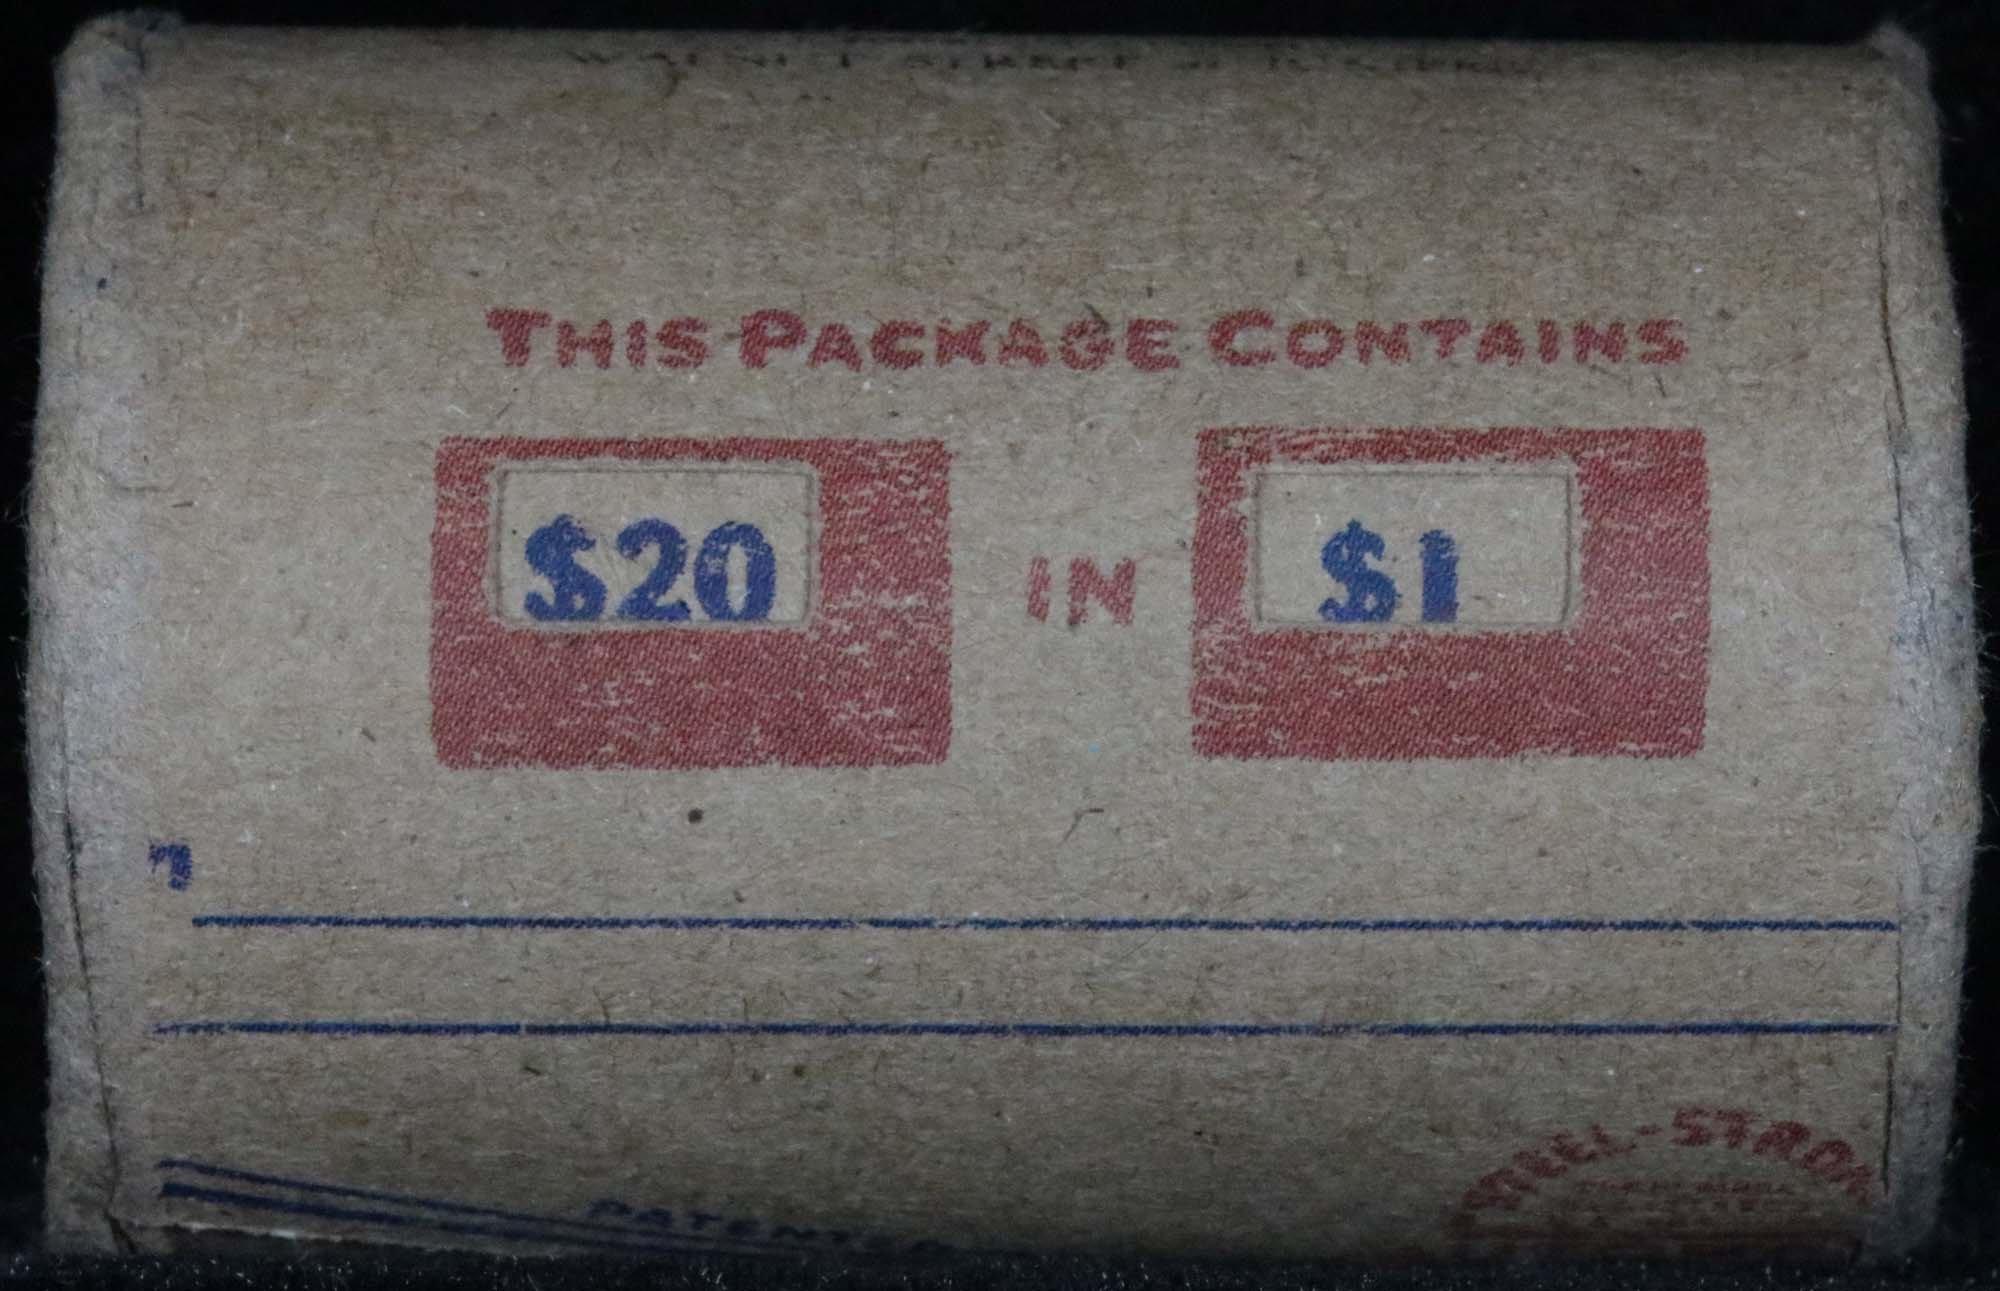 ***Auction Highlight*** Solid date Morgan $1 roll 1903-s, better than avg circ (fc)